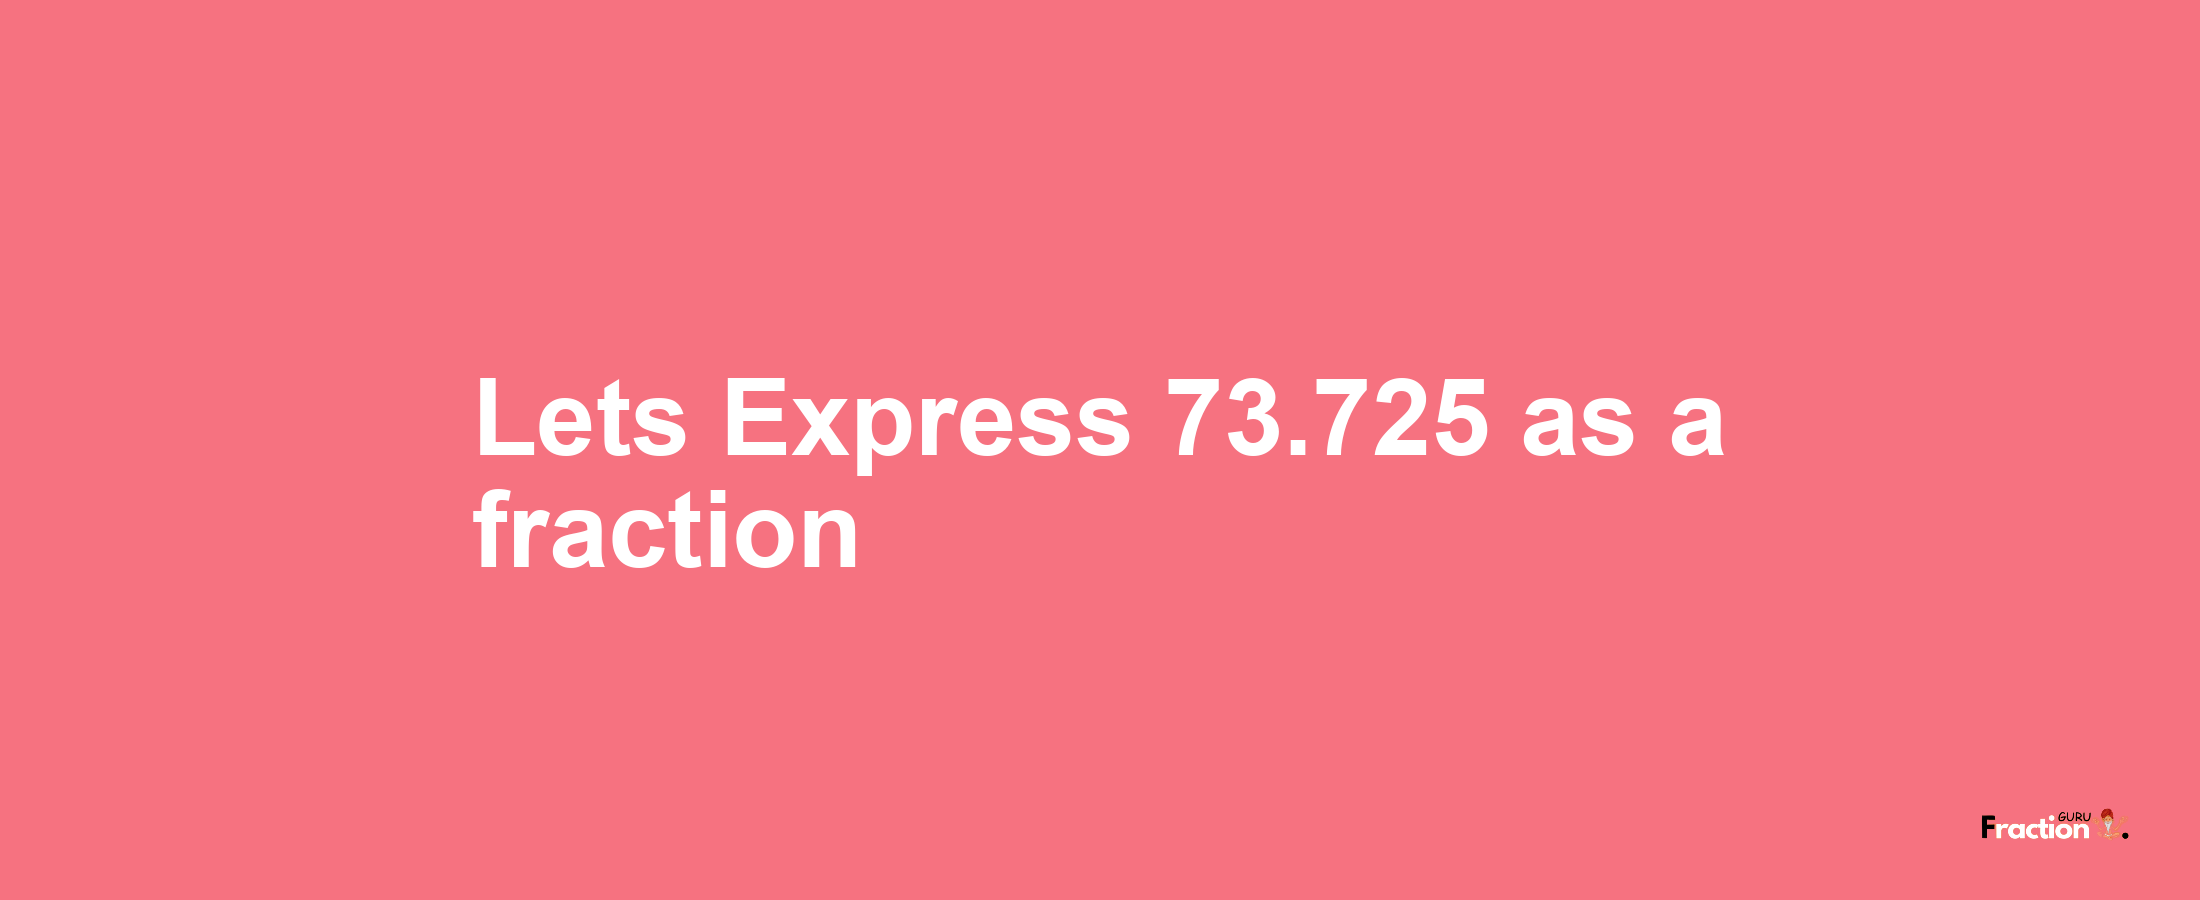 Lets Express 73.725 as afraction